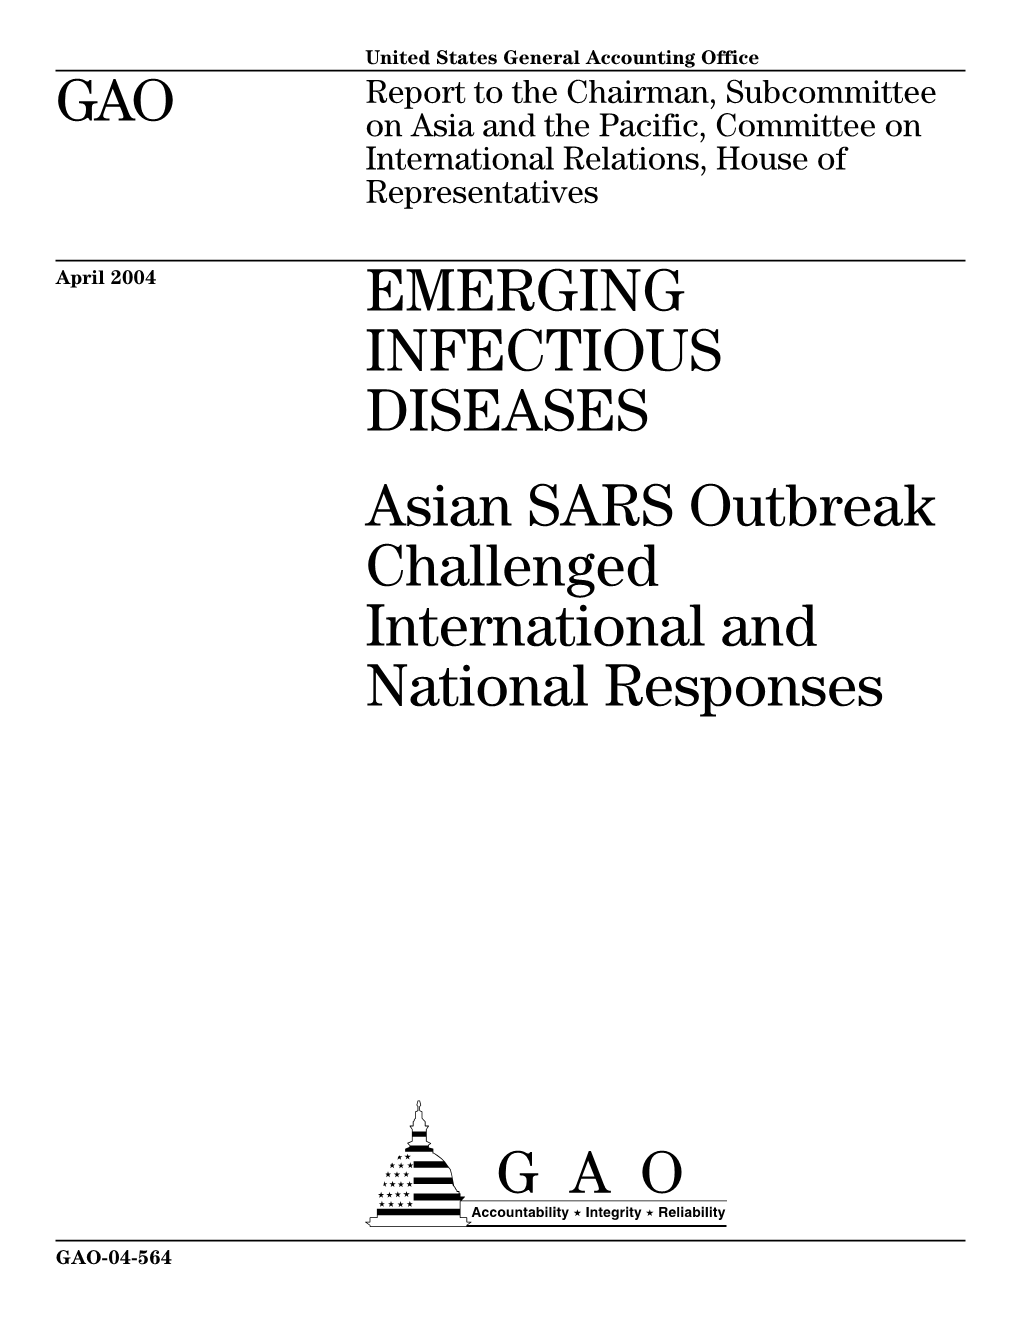 GAO-04-564 Emerging Infectious Diseases: Asian SARS Outbreak Challenged International and National Responses